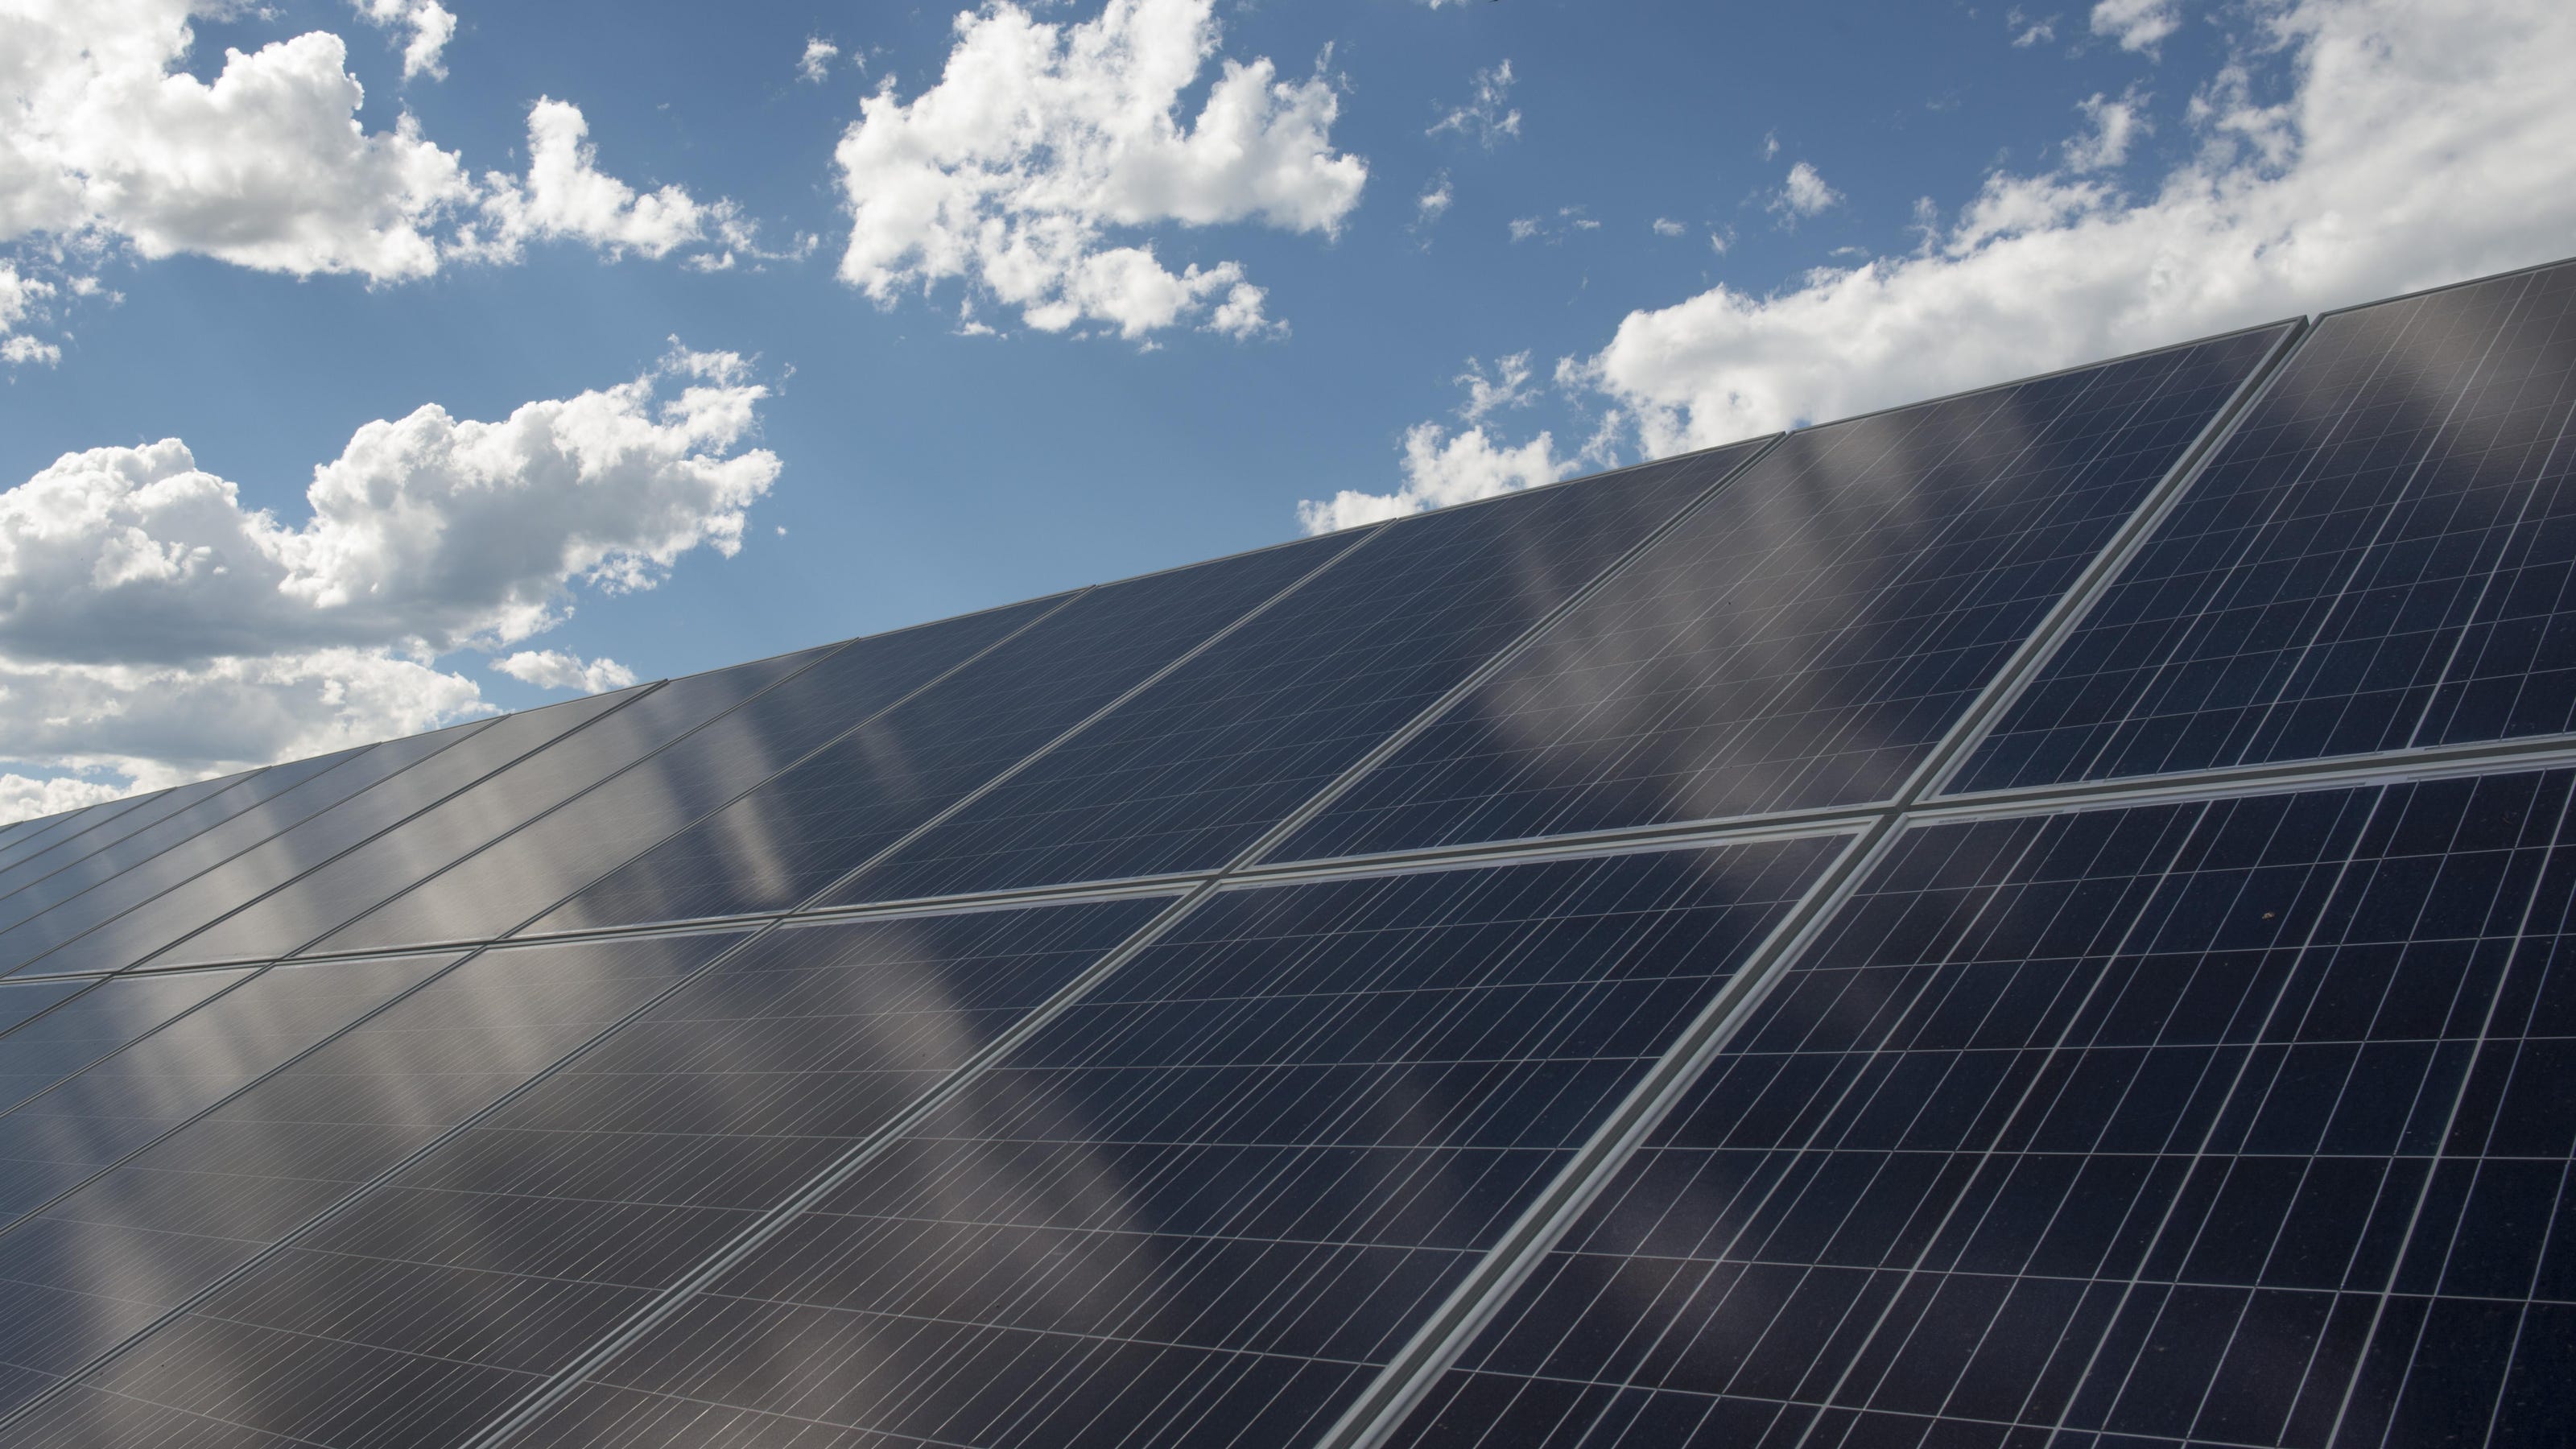 Poudre Valley REA Adds 40 000 Solar Panels